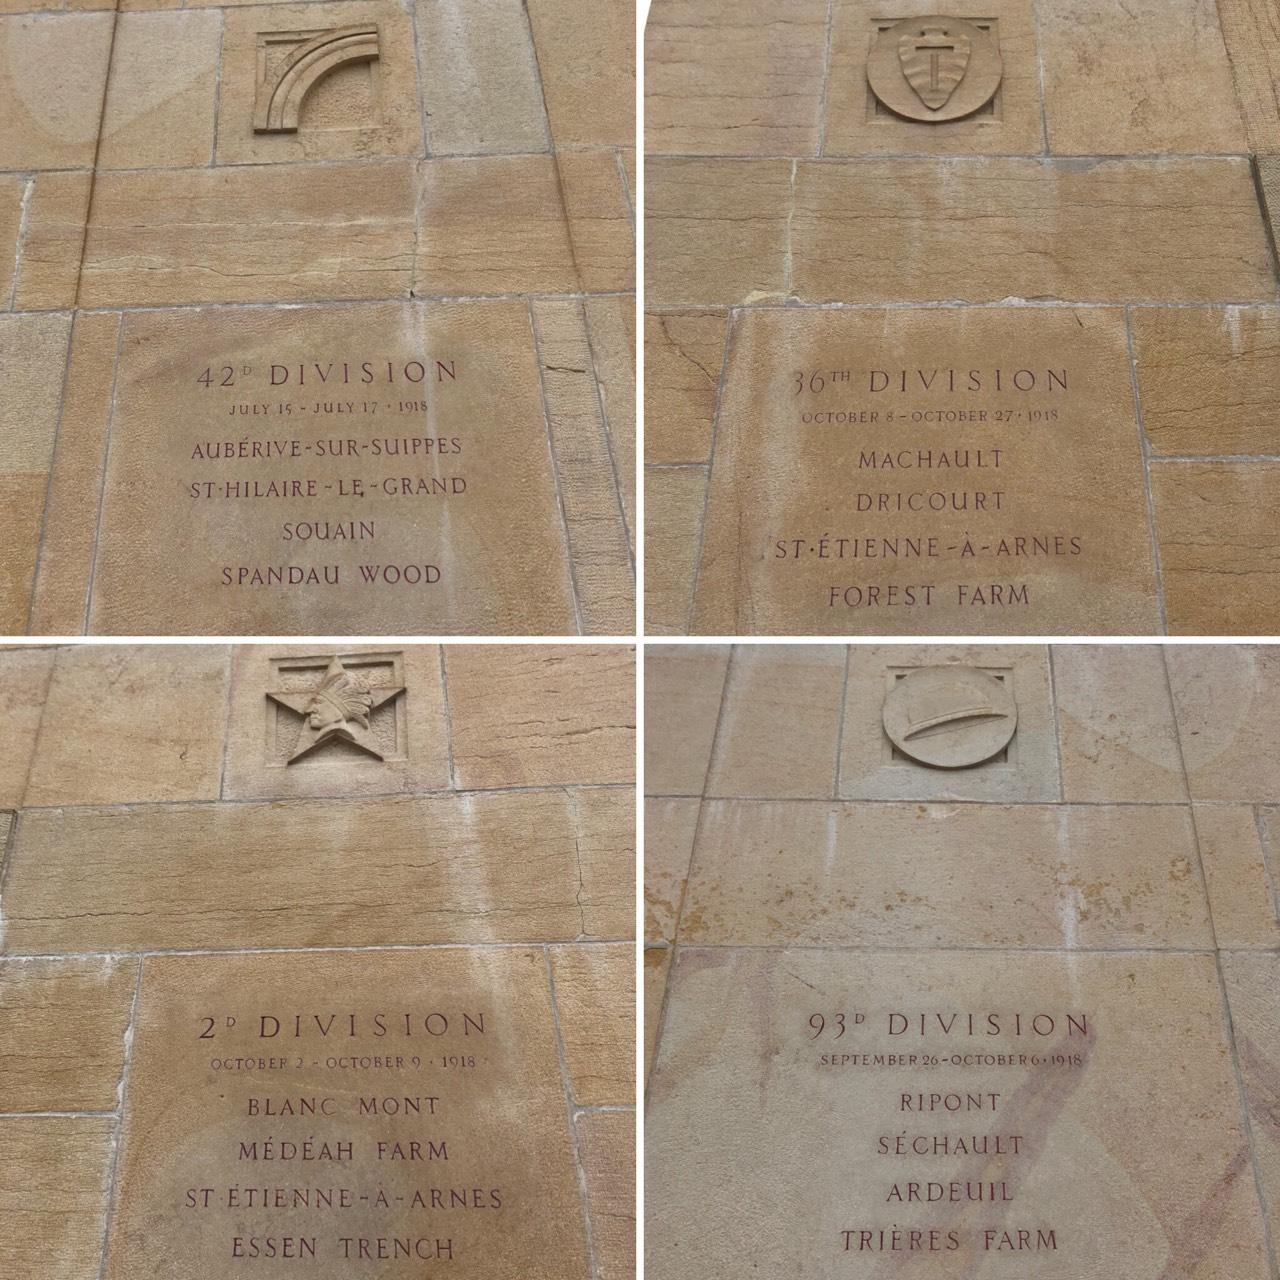 Four photos of four different inscriptions on various monuments honoring different AEF units.